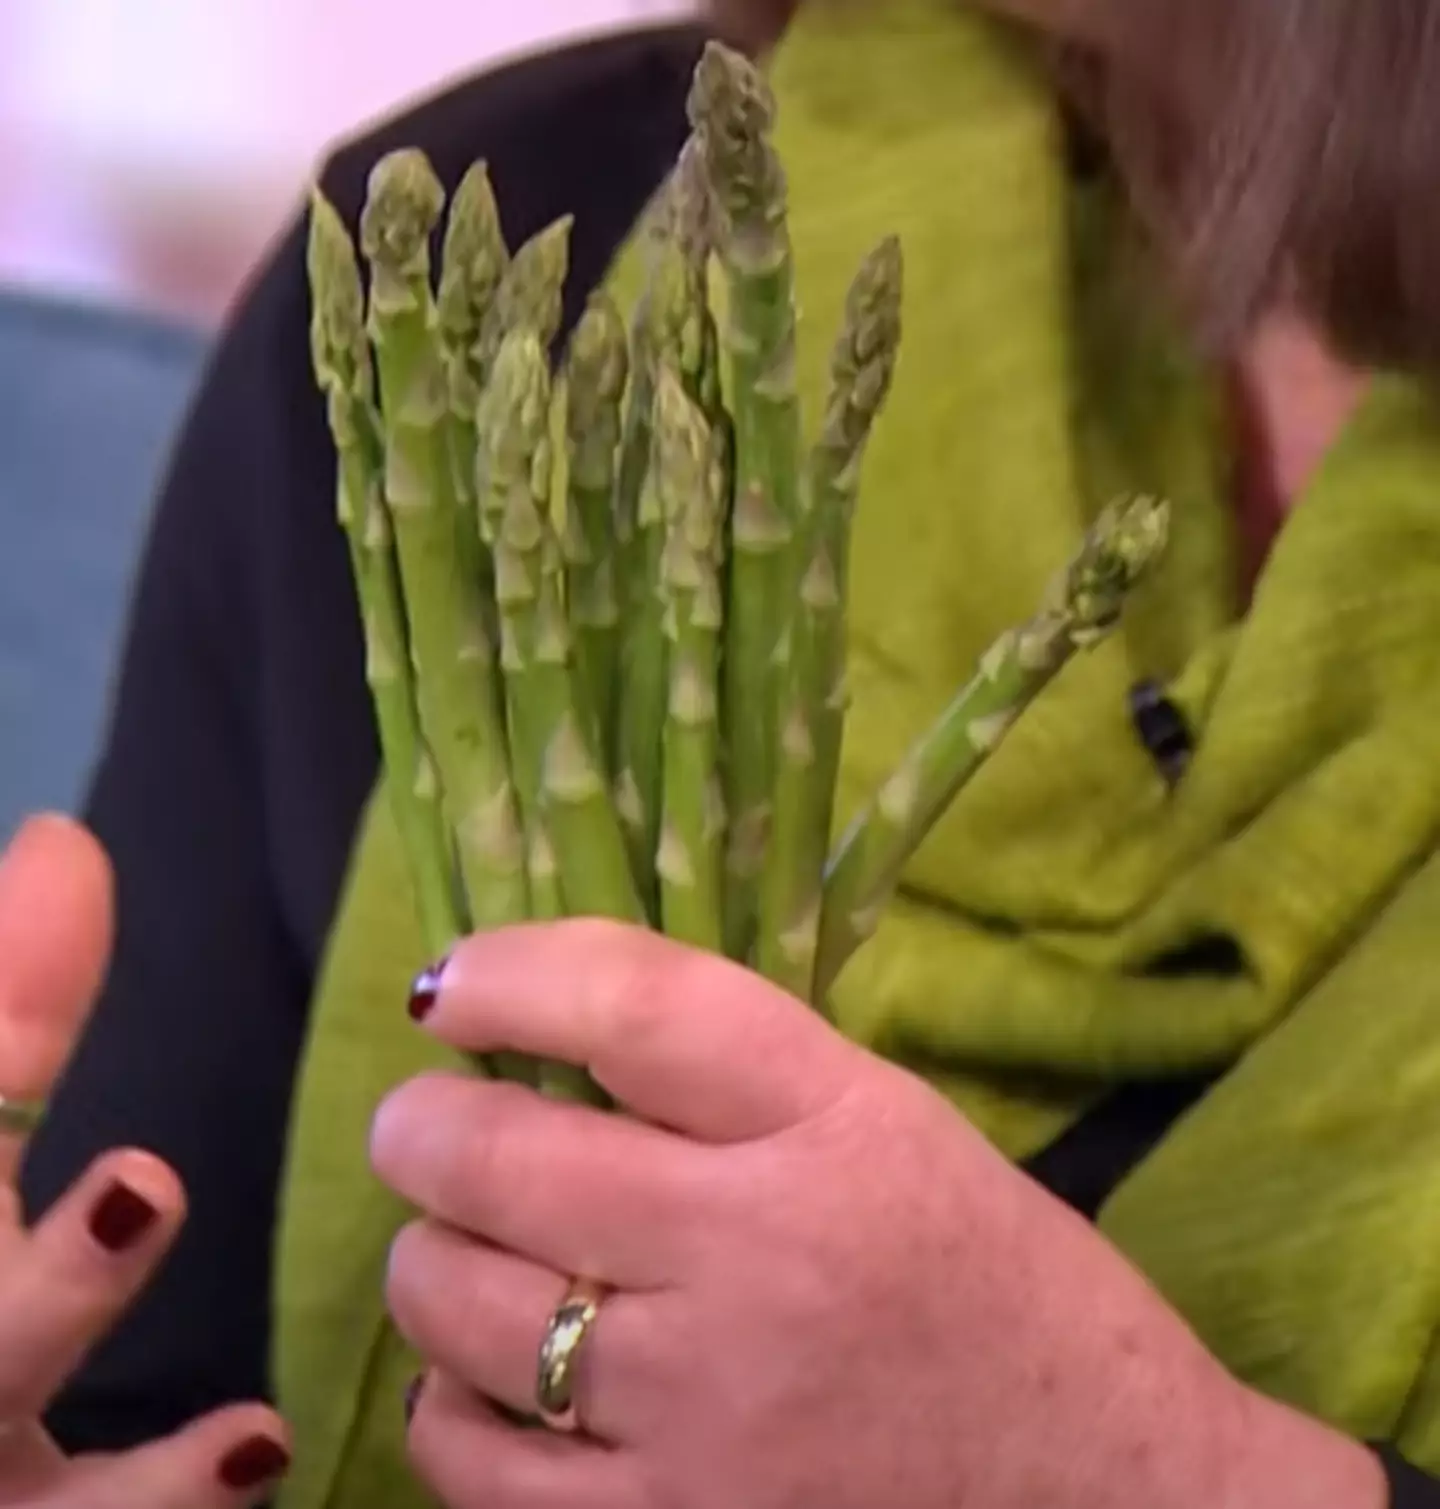 The fortune-teller uses asparagus to tell the future.